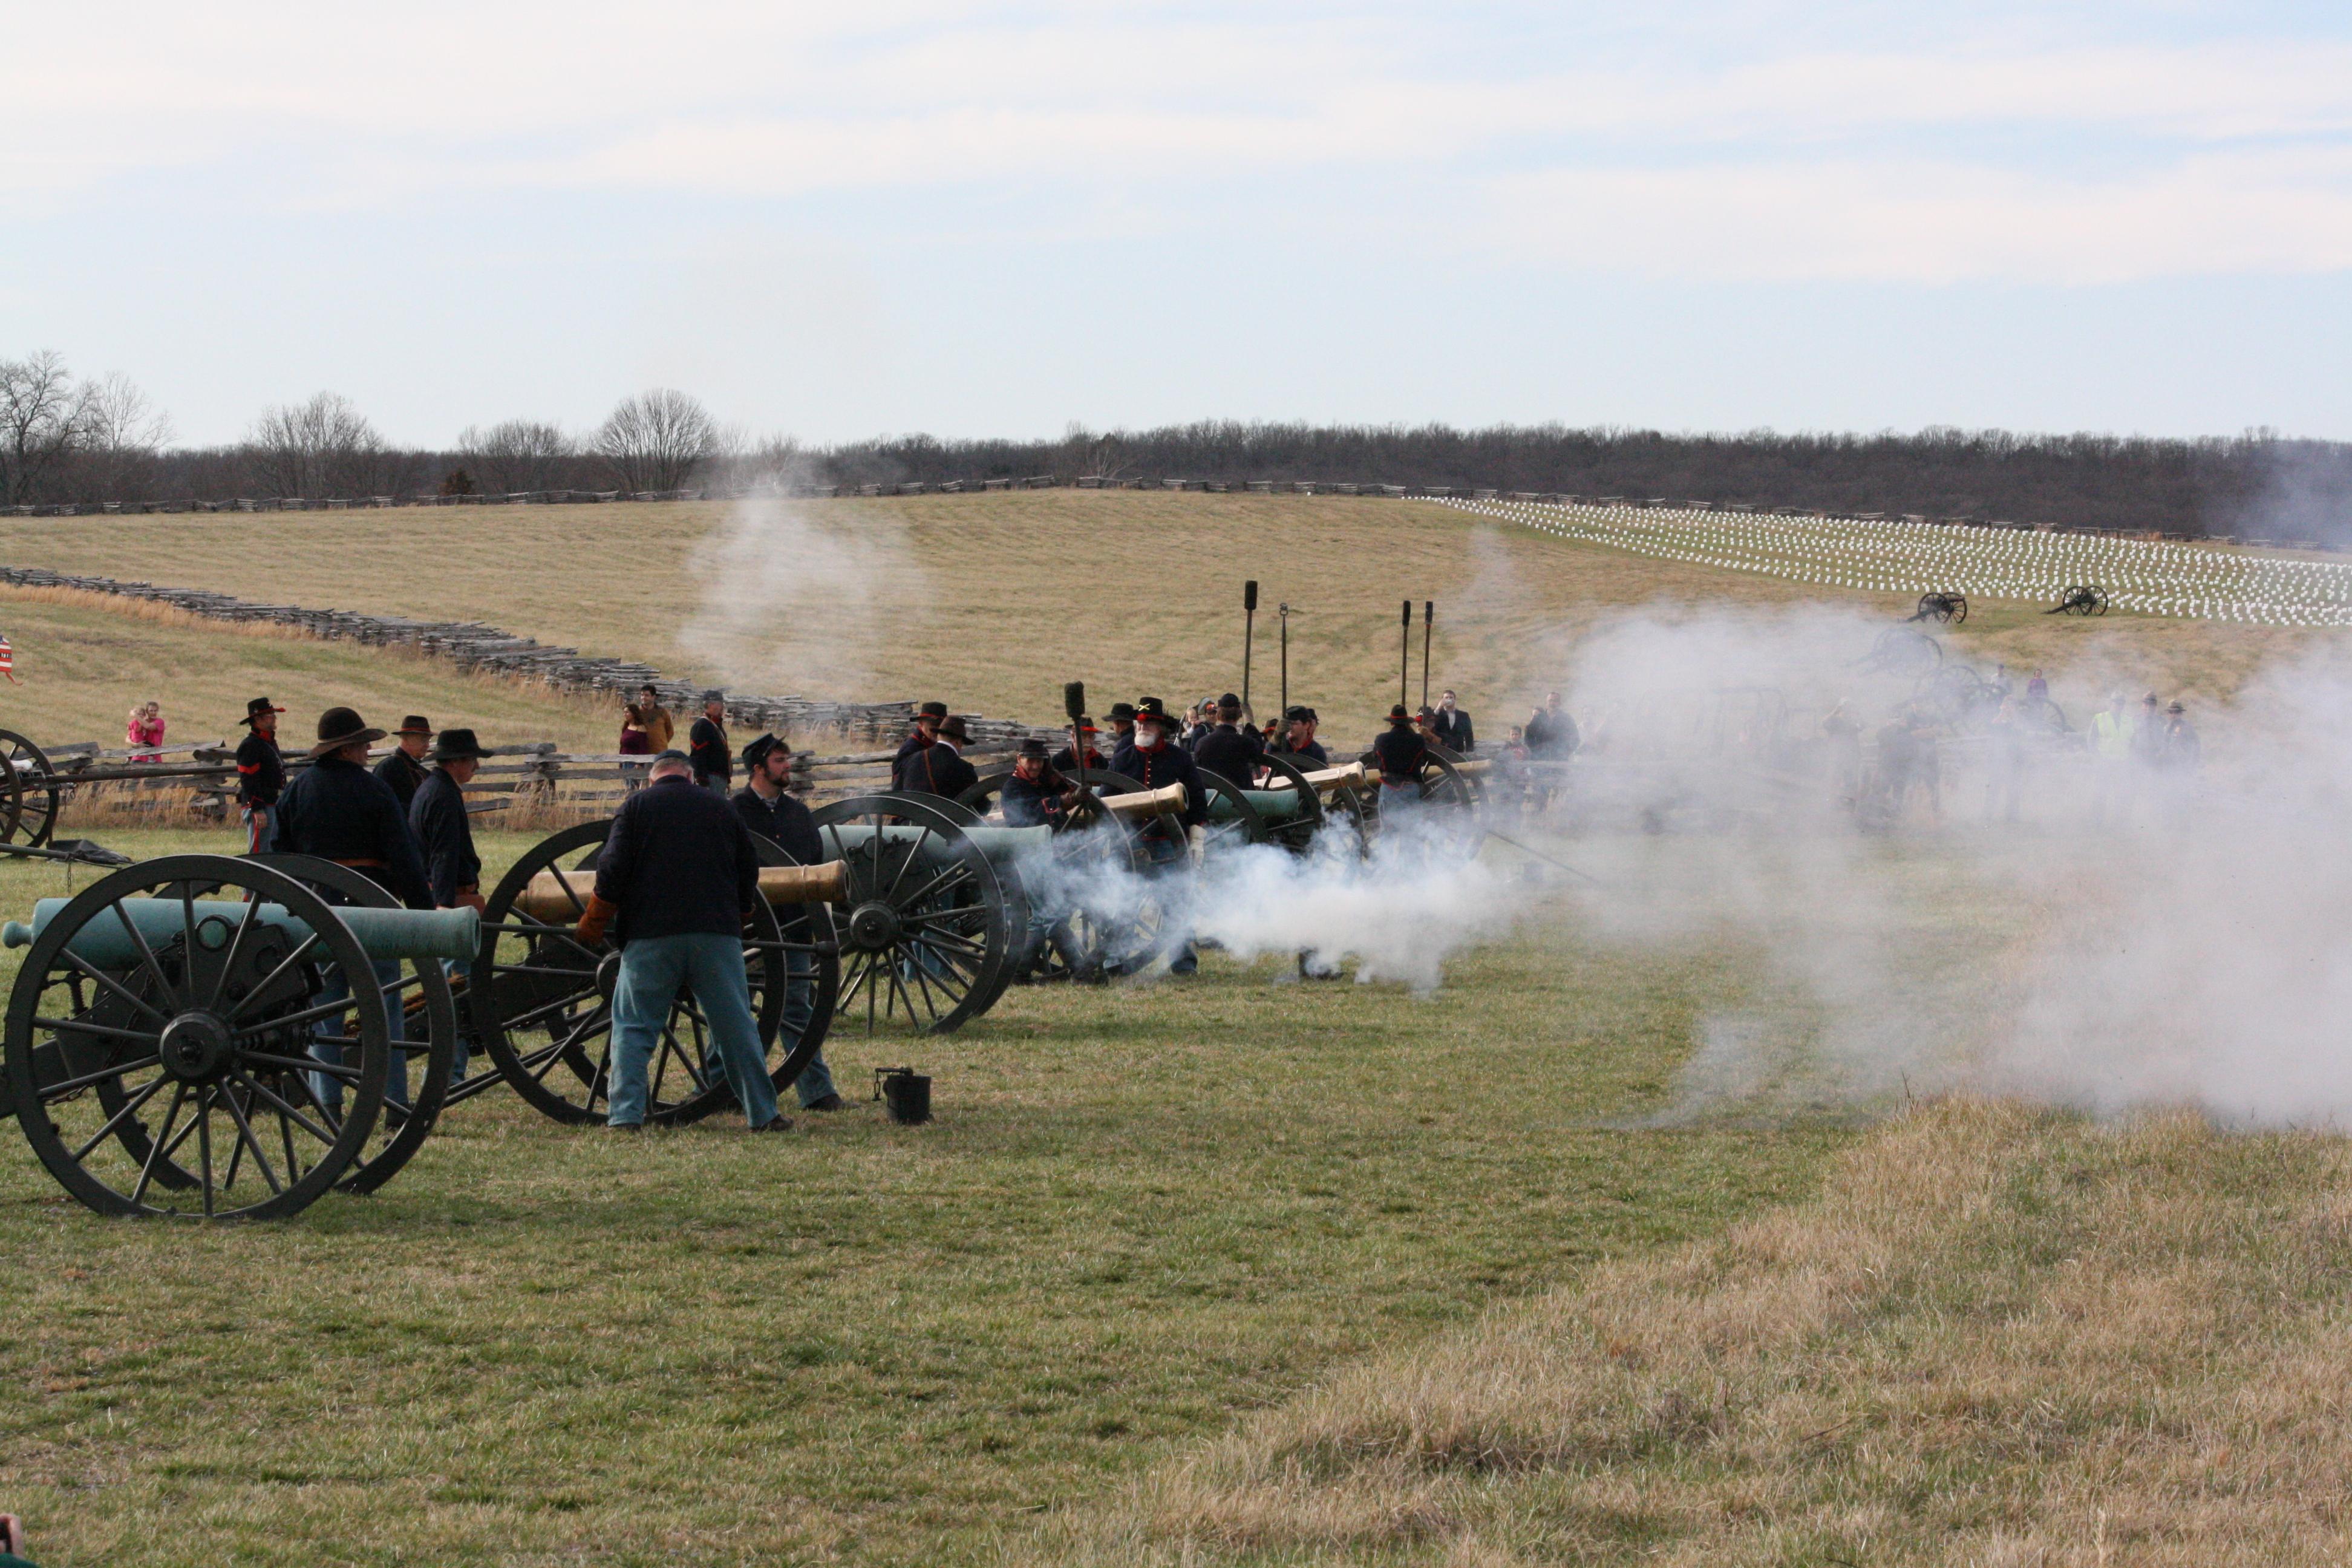 Photo of Union cannons and crew firing cannons in a field.